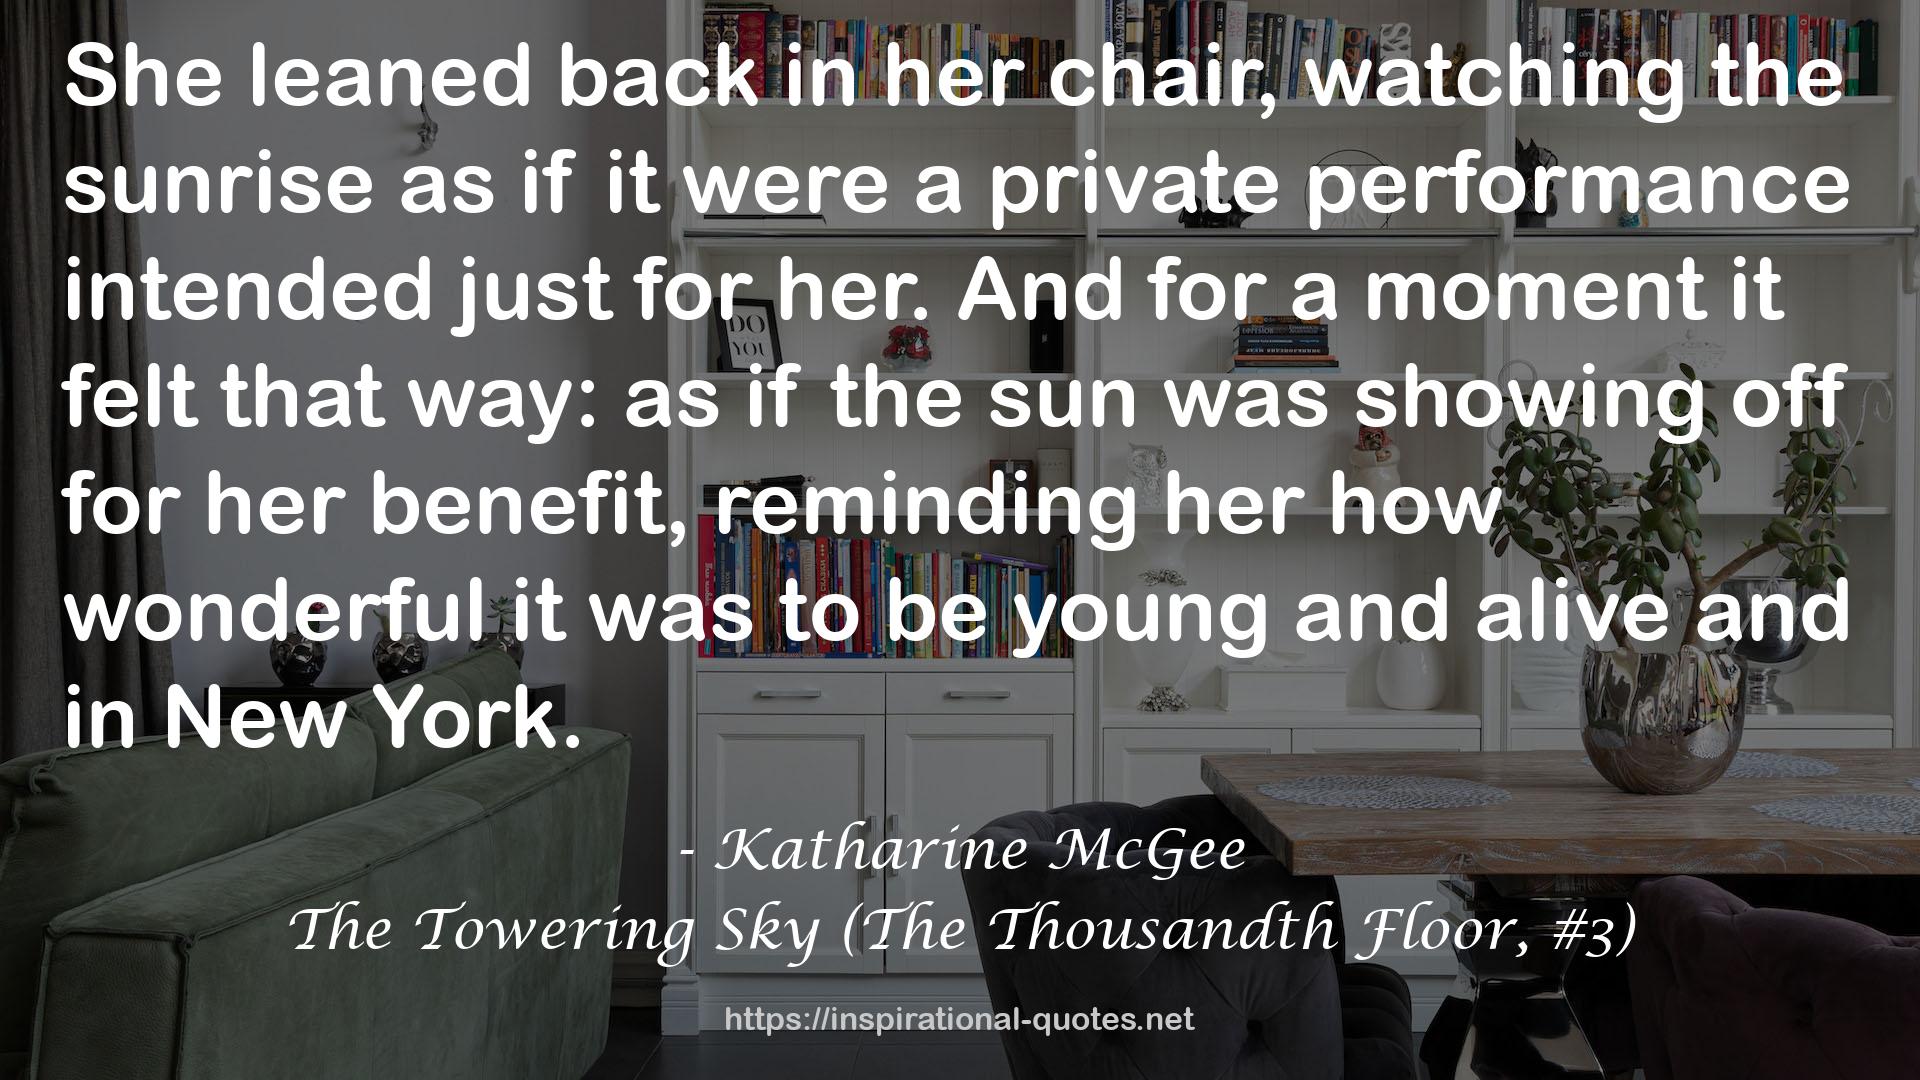 Katharine McGee QUOTES